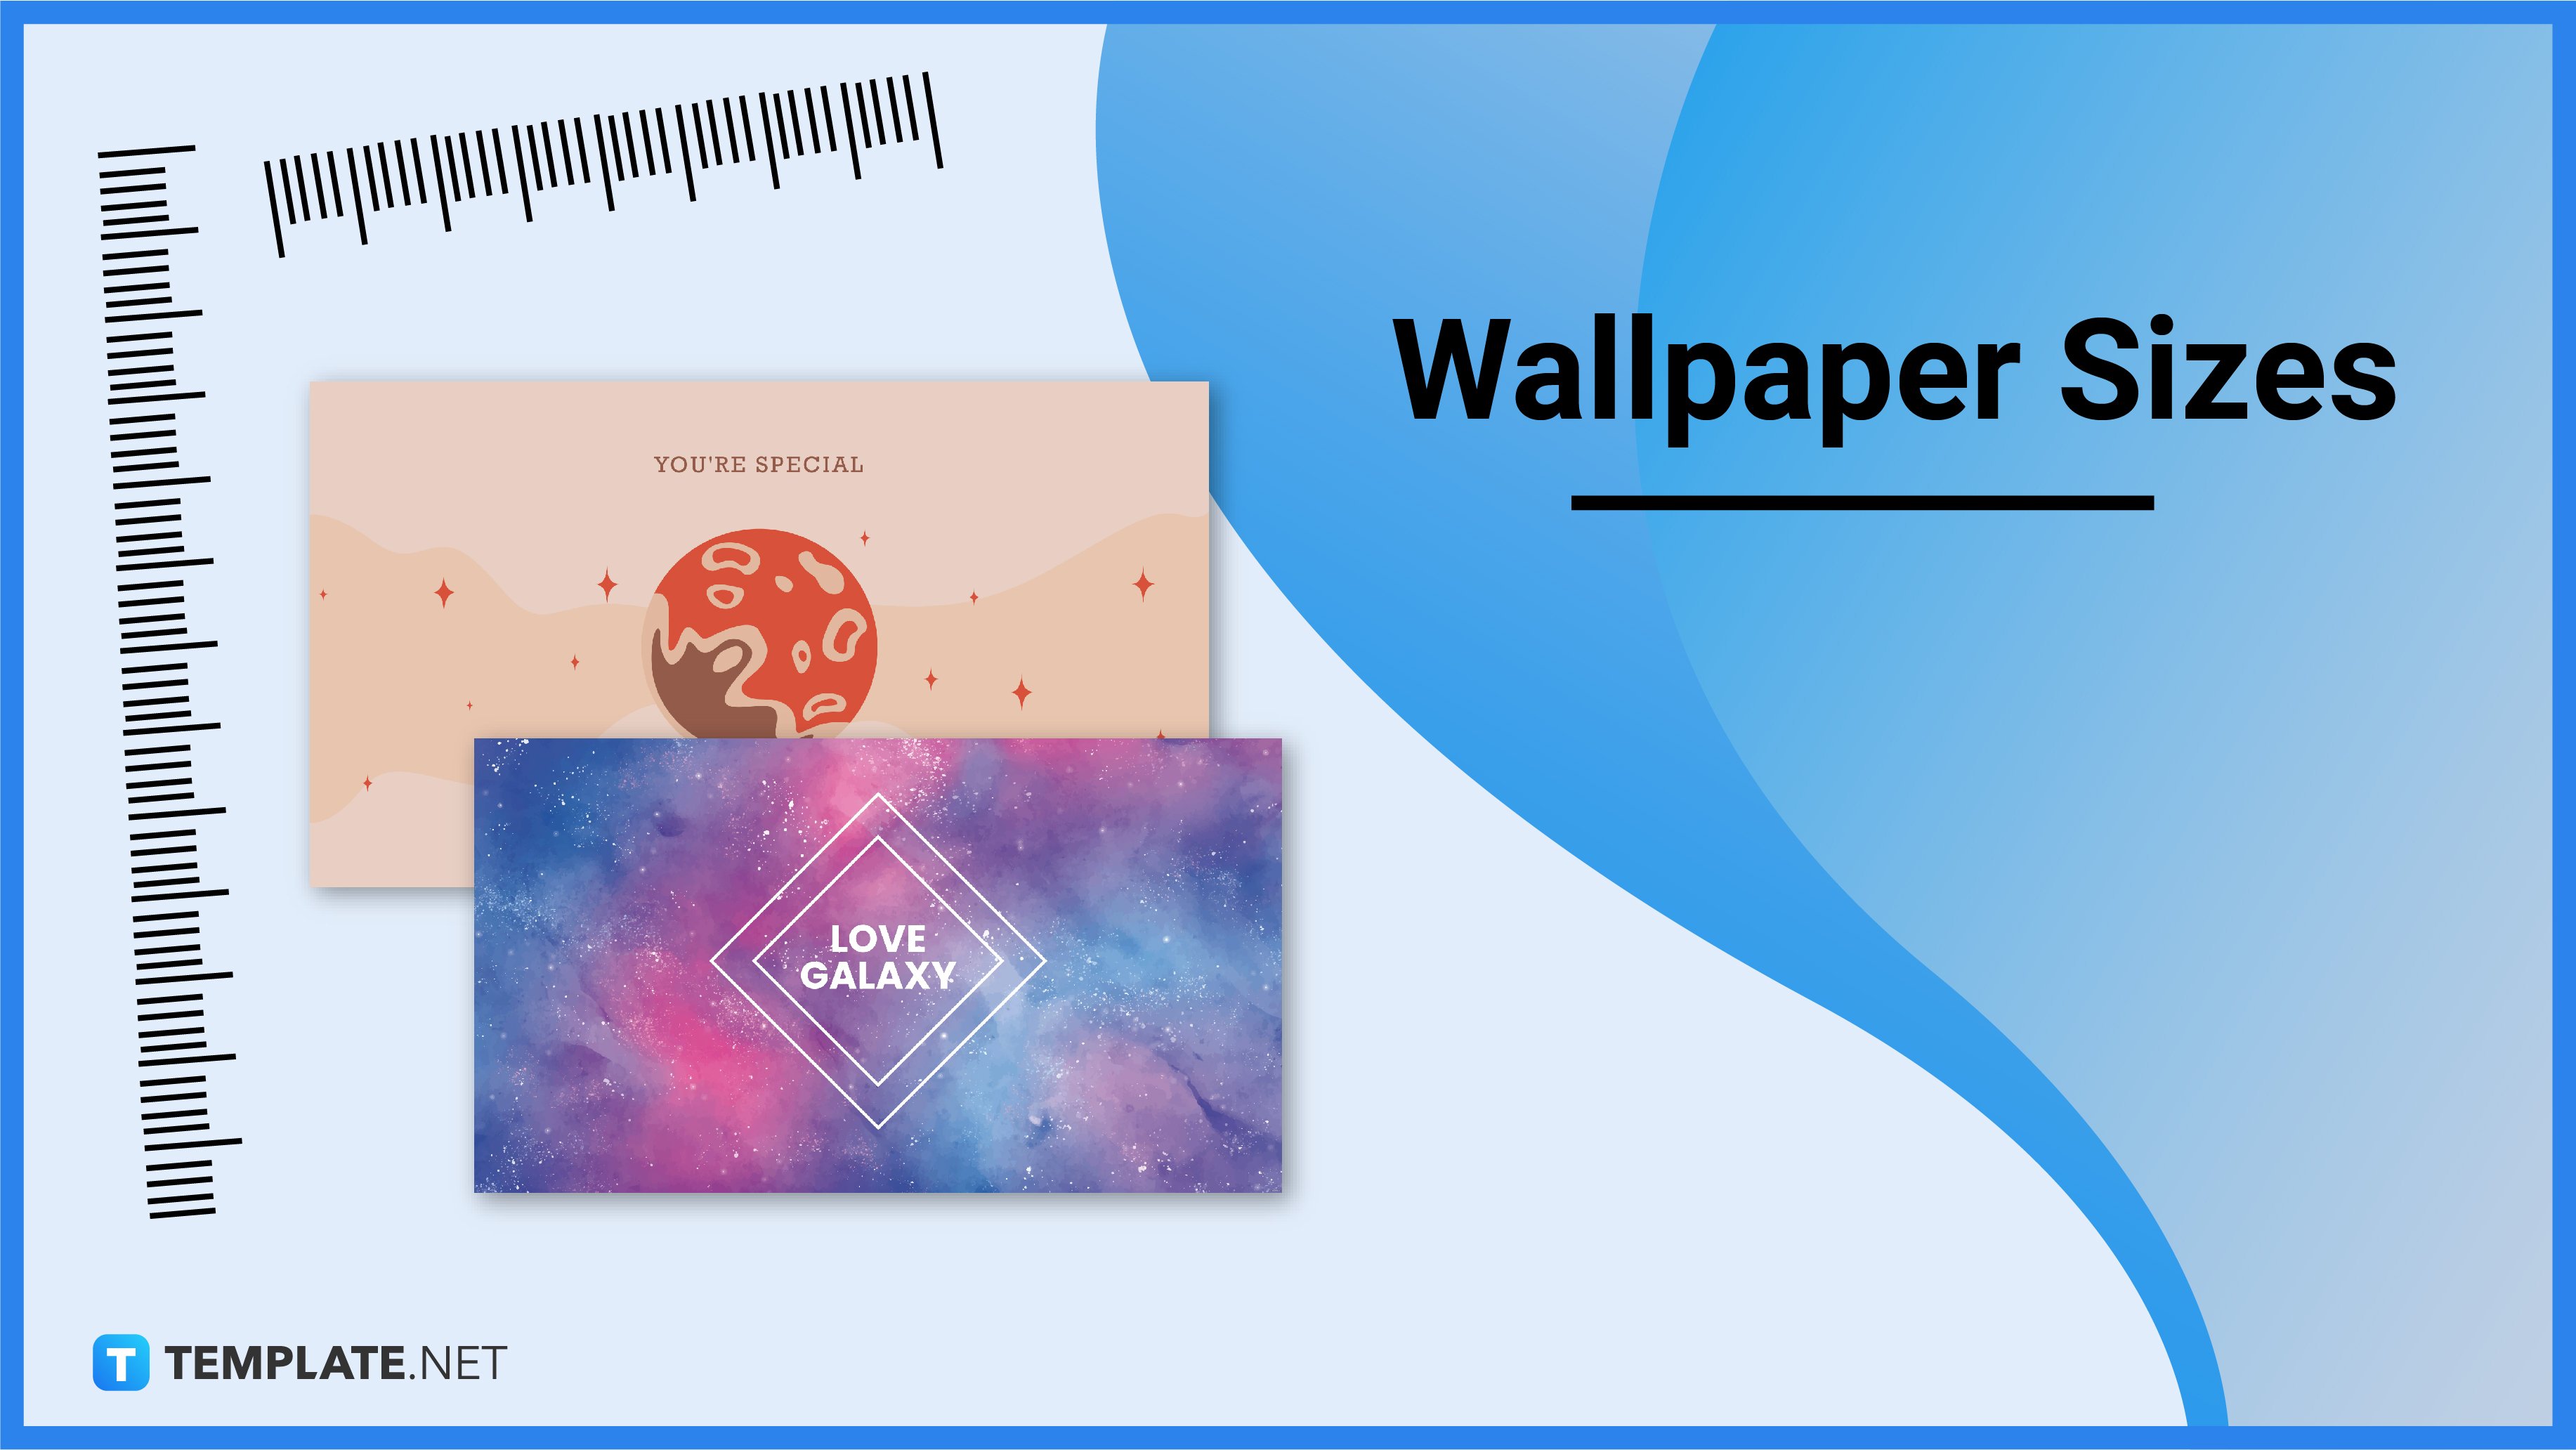 Wallpaper Size - Dimension, Inches, mm, cms, Pixel